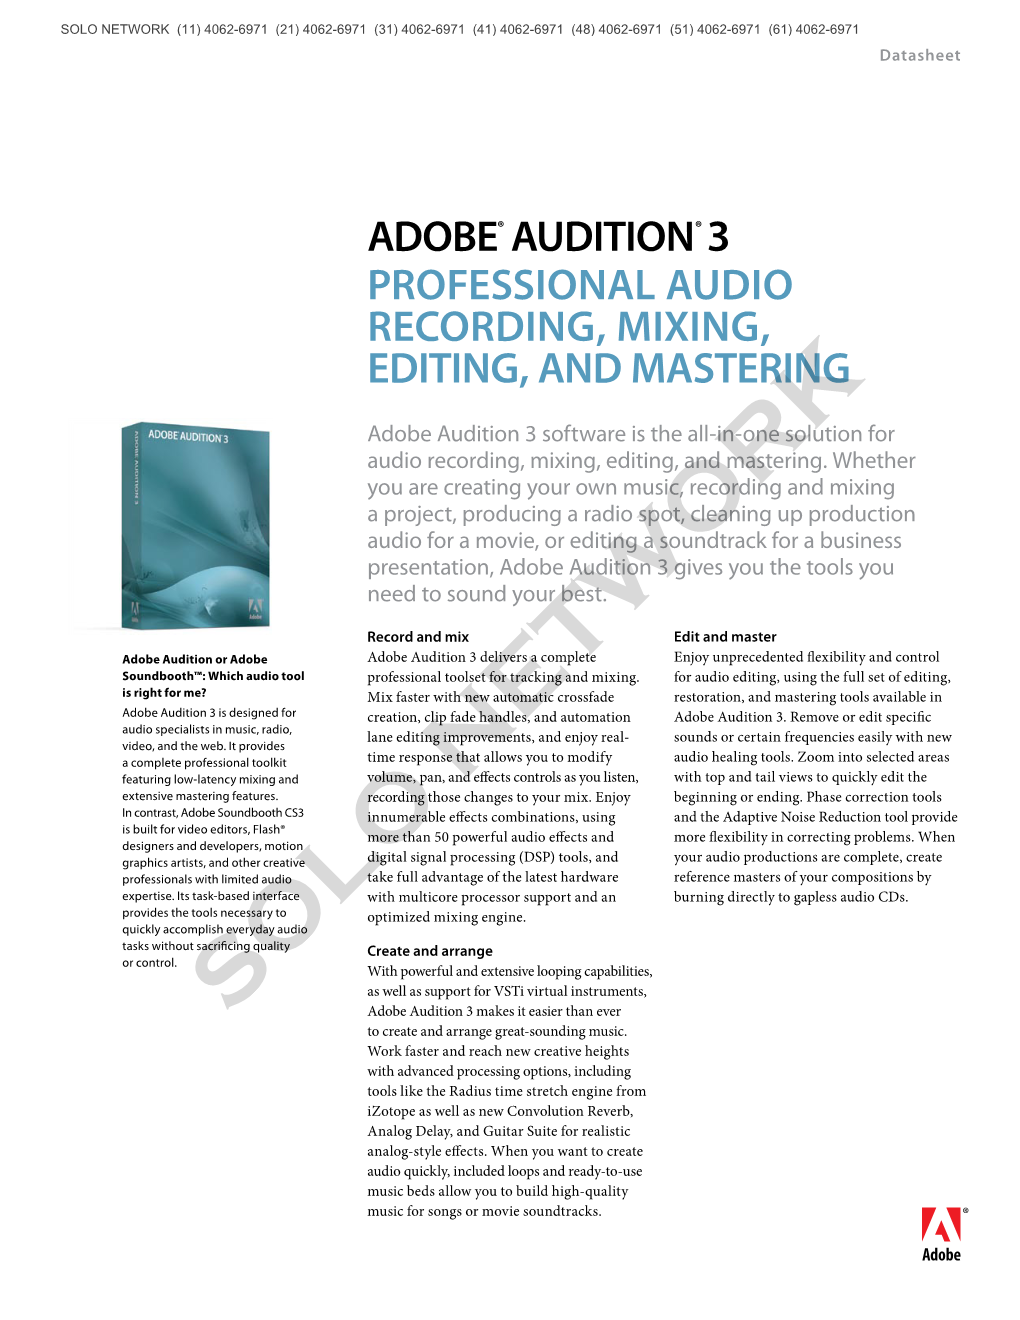 Adobe Audition 3 | Solo Network